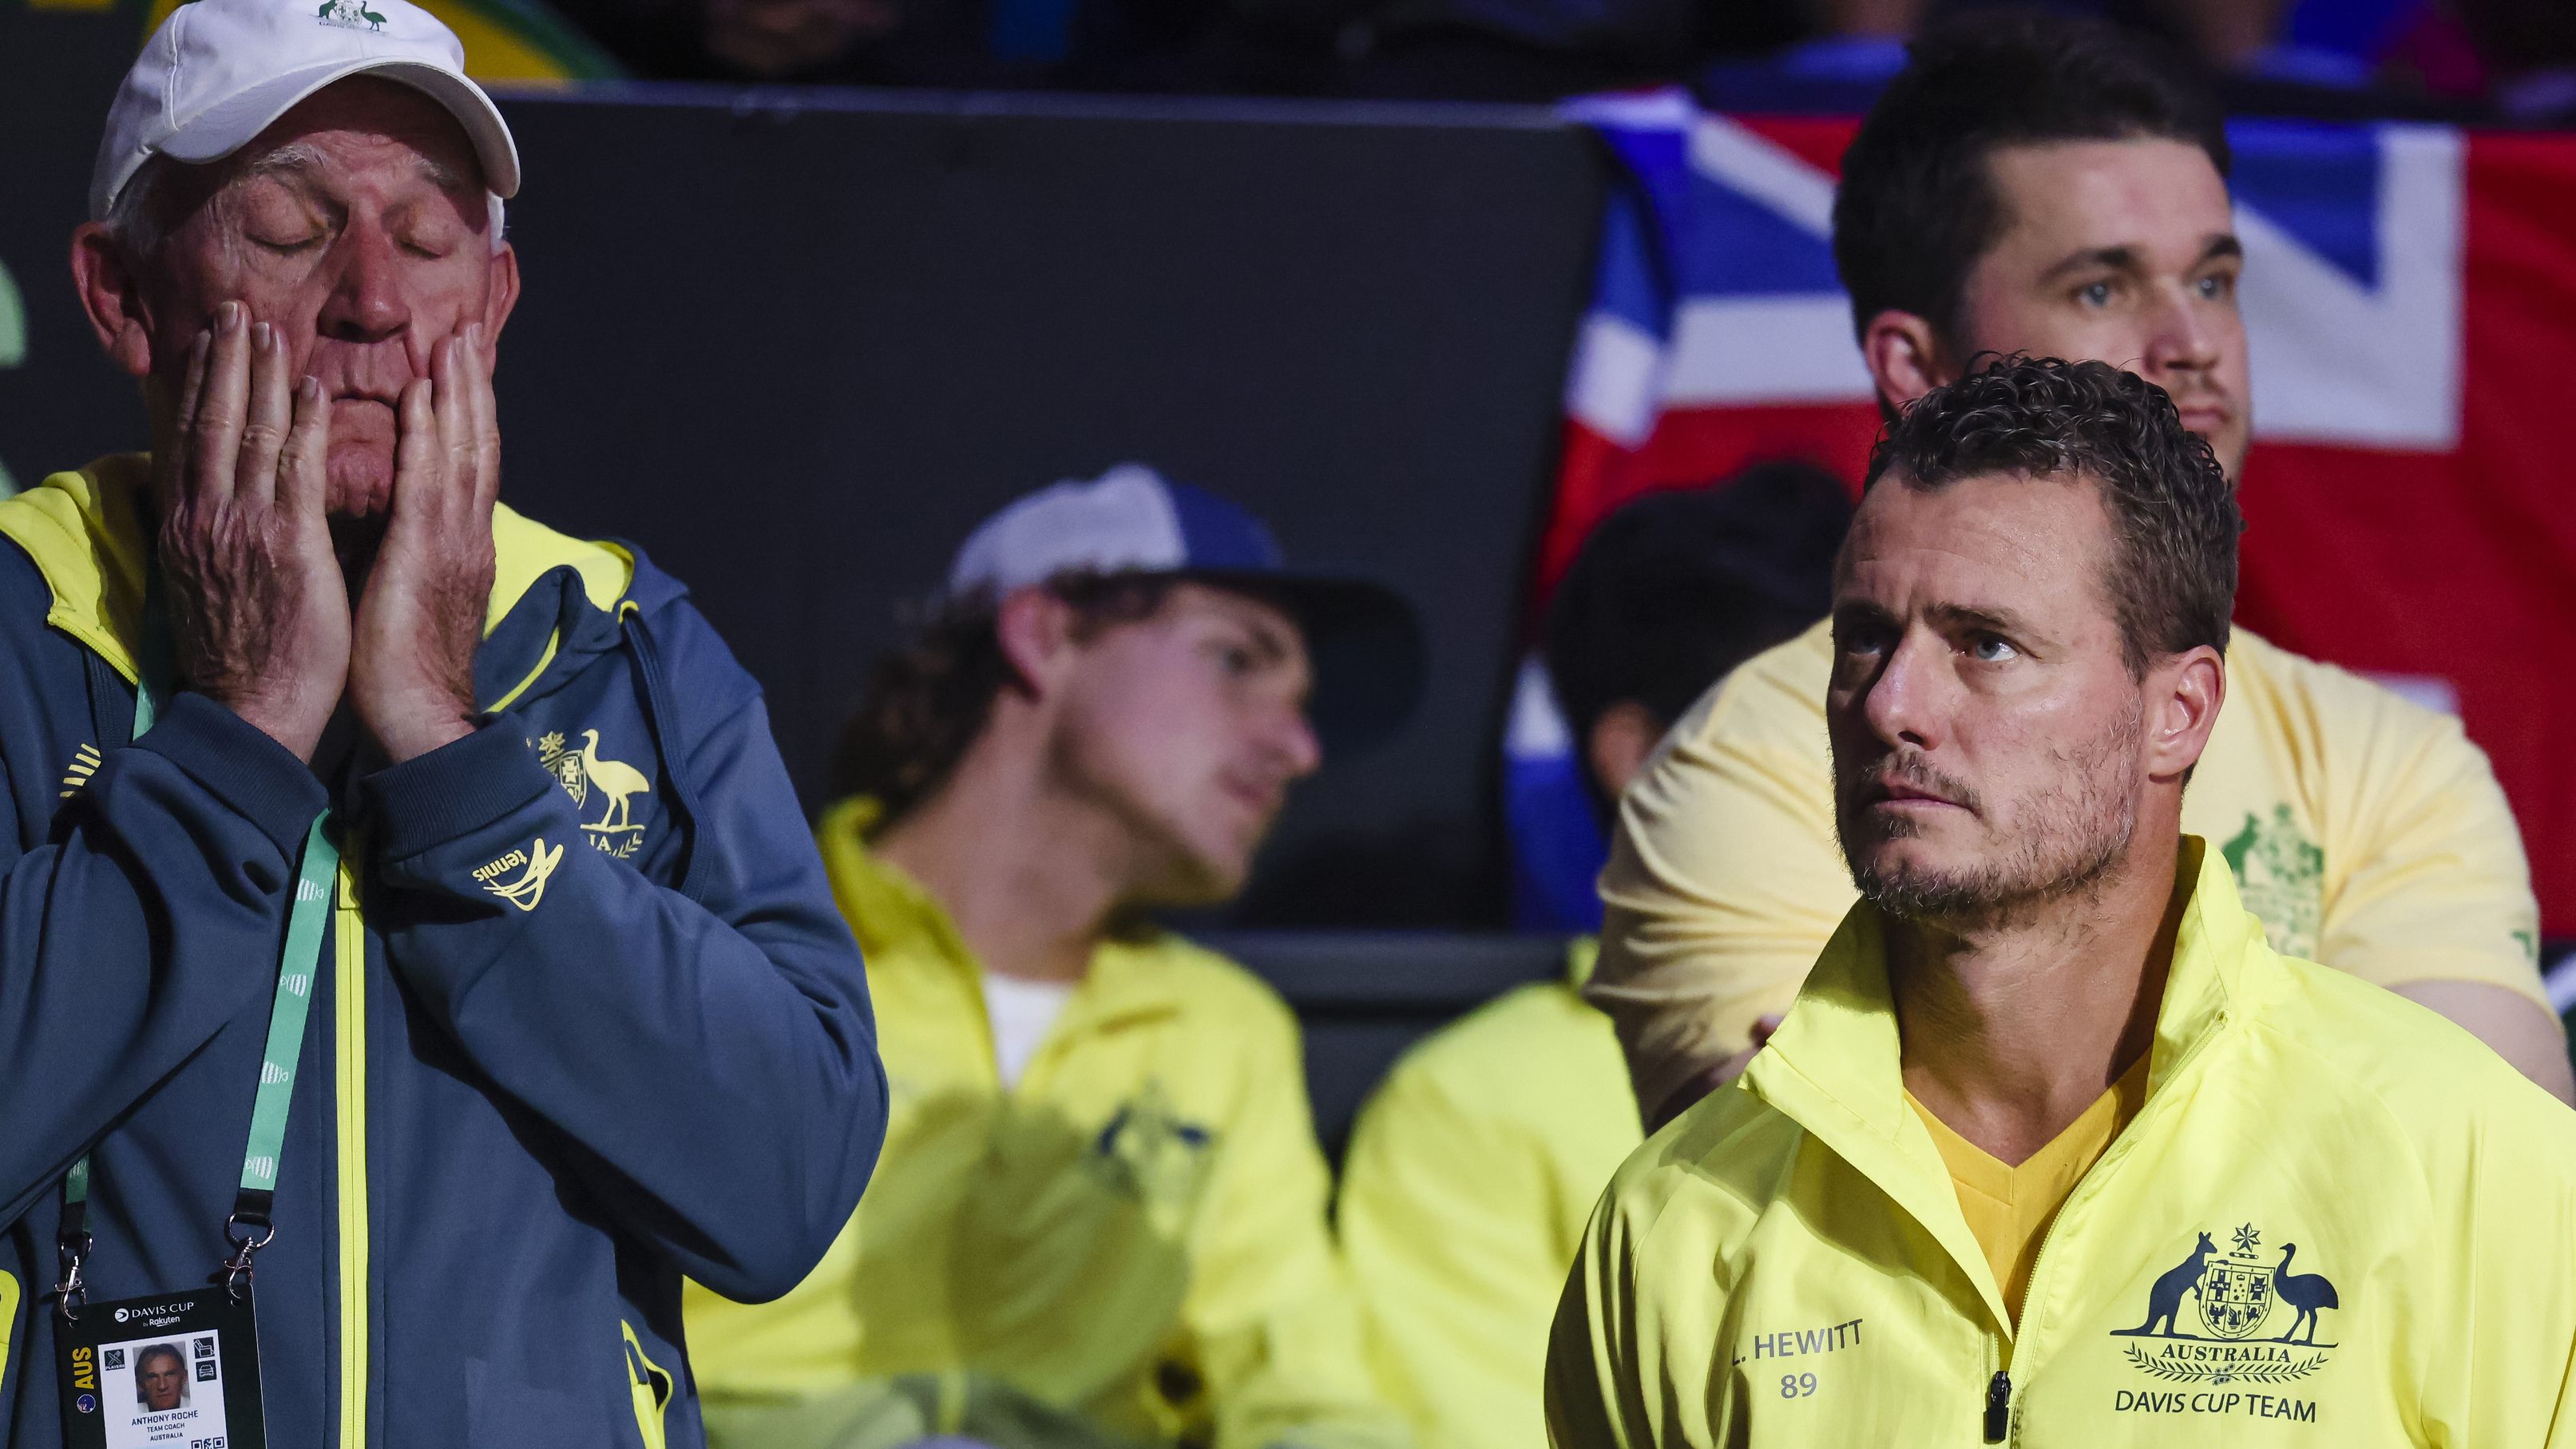 Australian team coach Anthony Roche (left) and team captain Lleyton Hewitt react after losing.